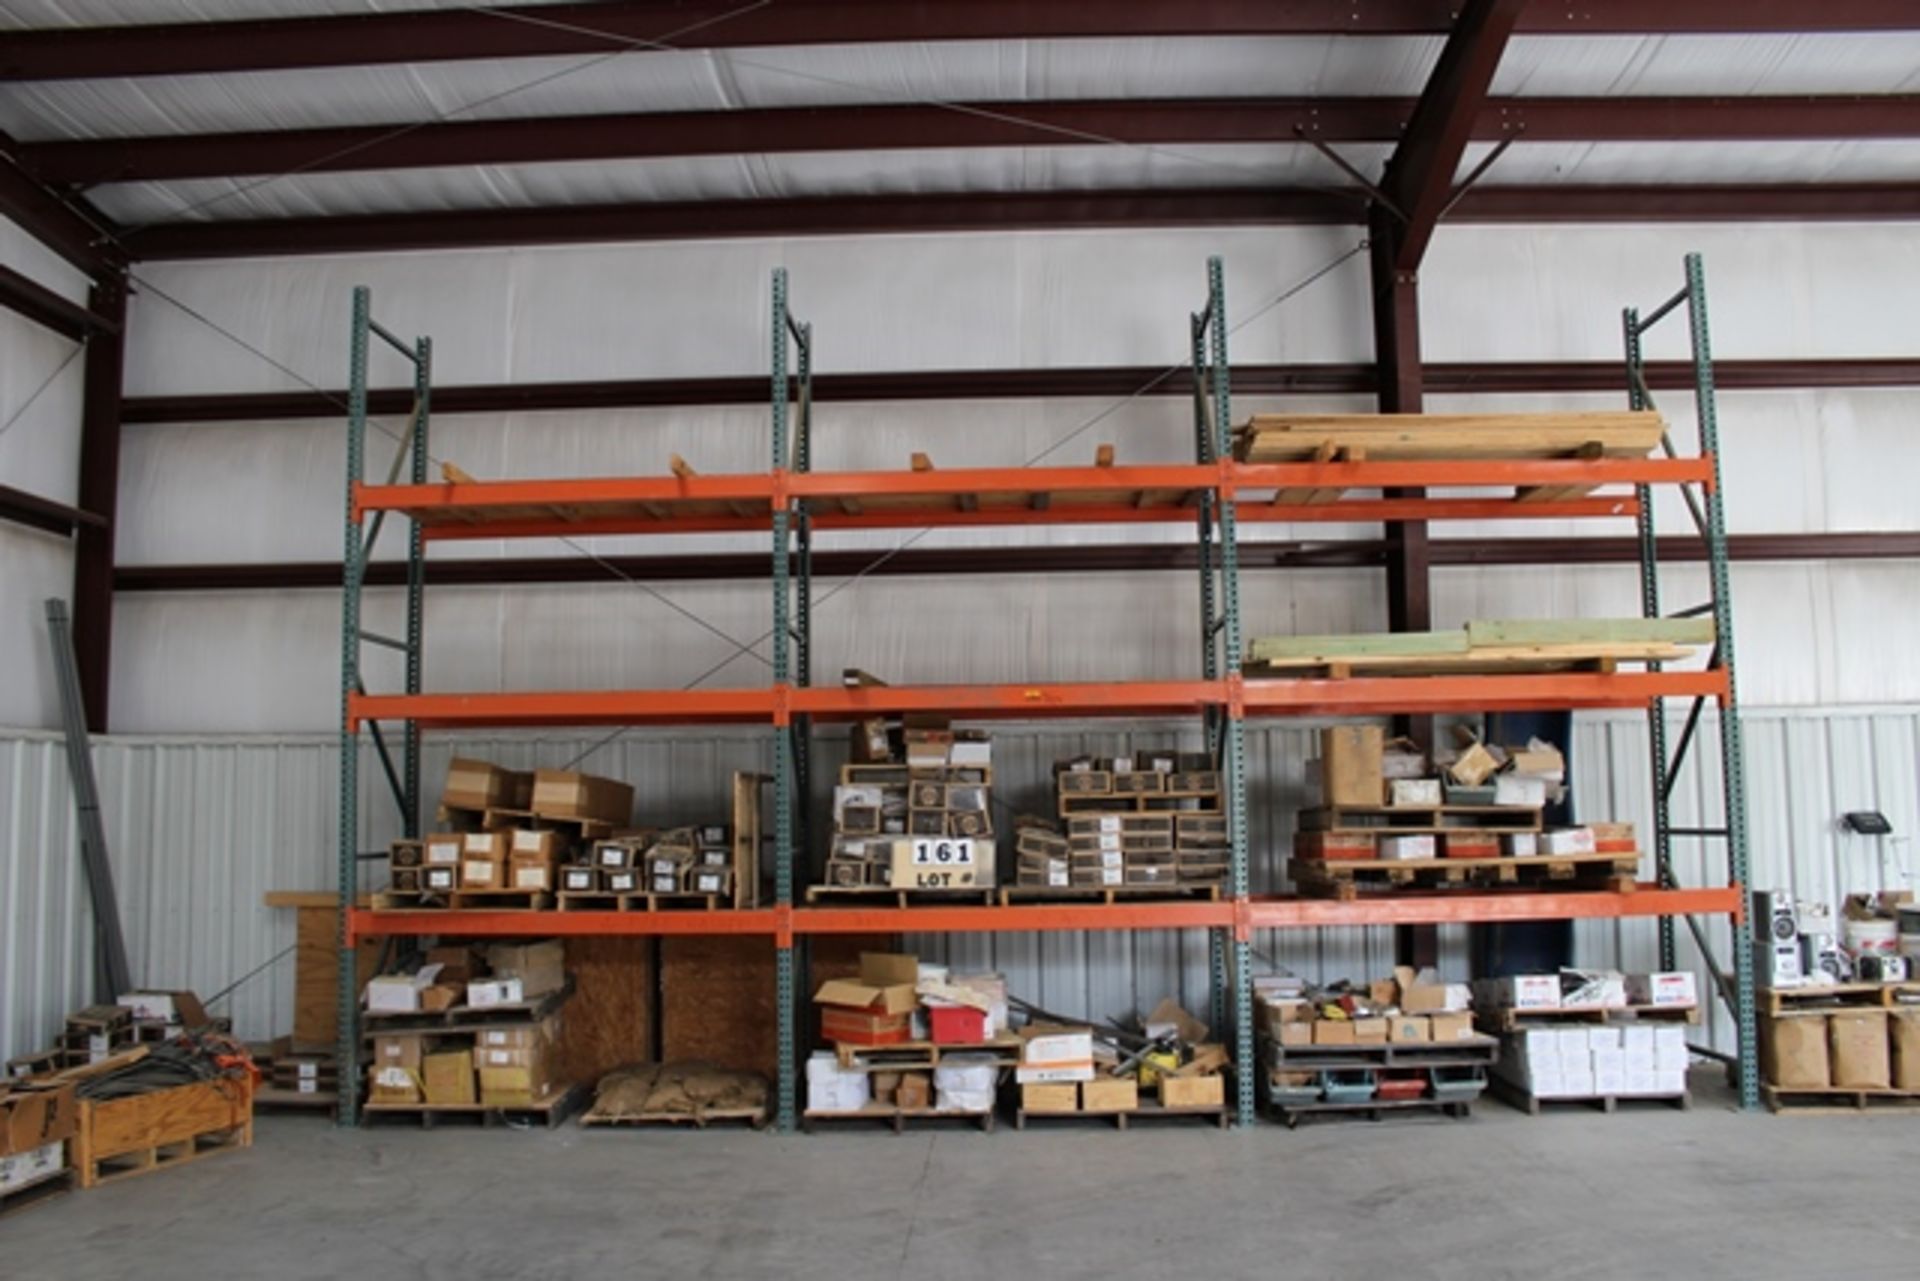 (2) 9' & (1) 8' x 42" Sections for Pallet Shelving